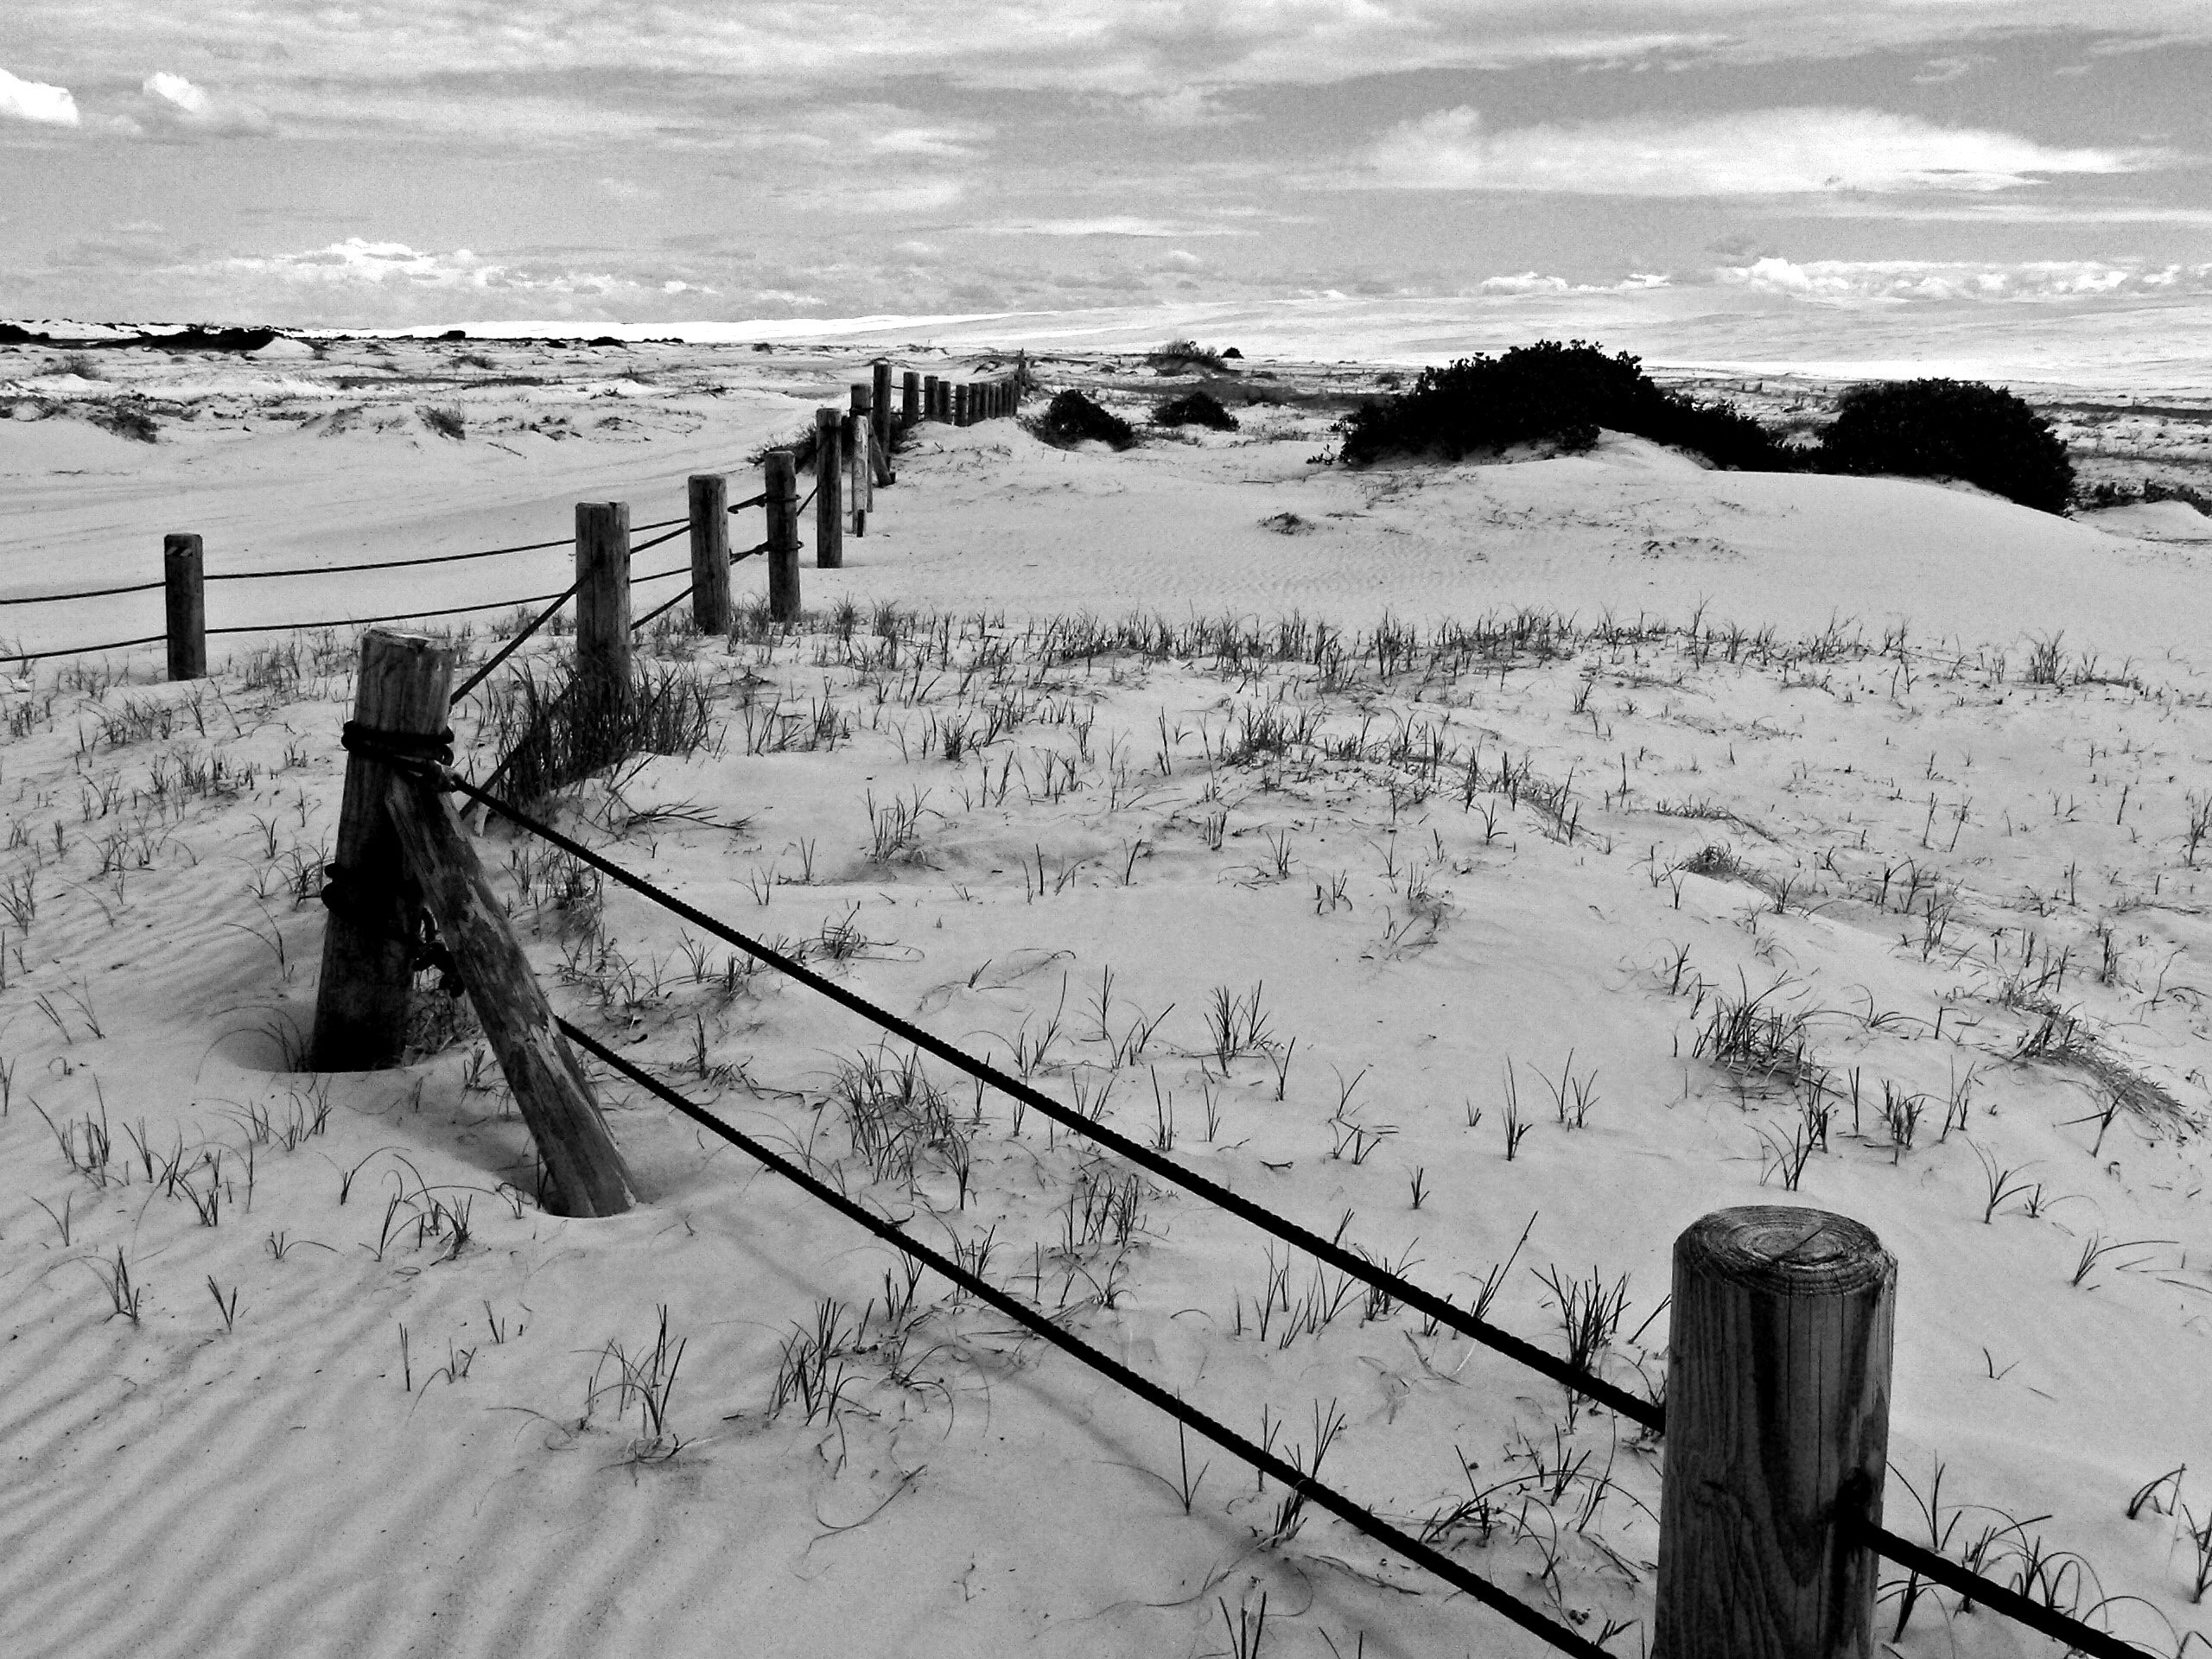 Fences in the sand dunes